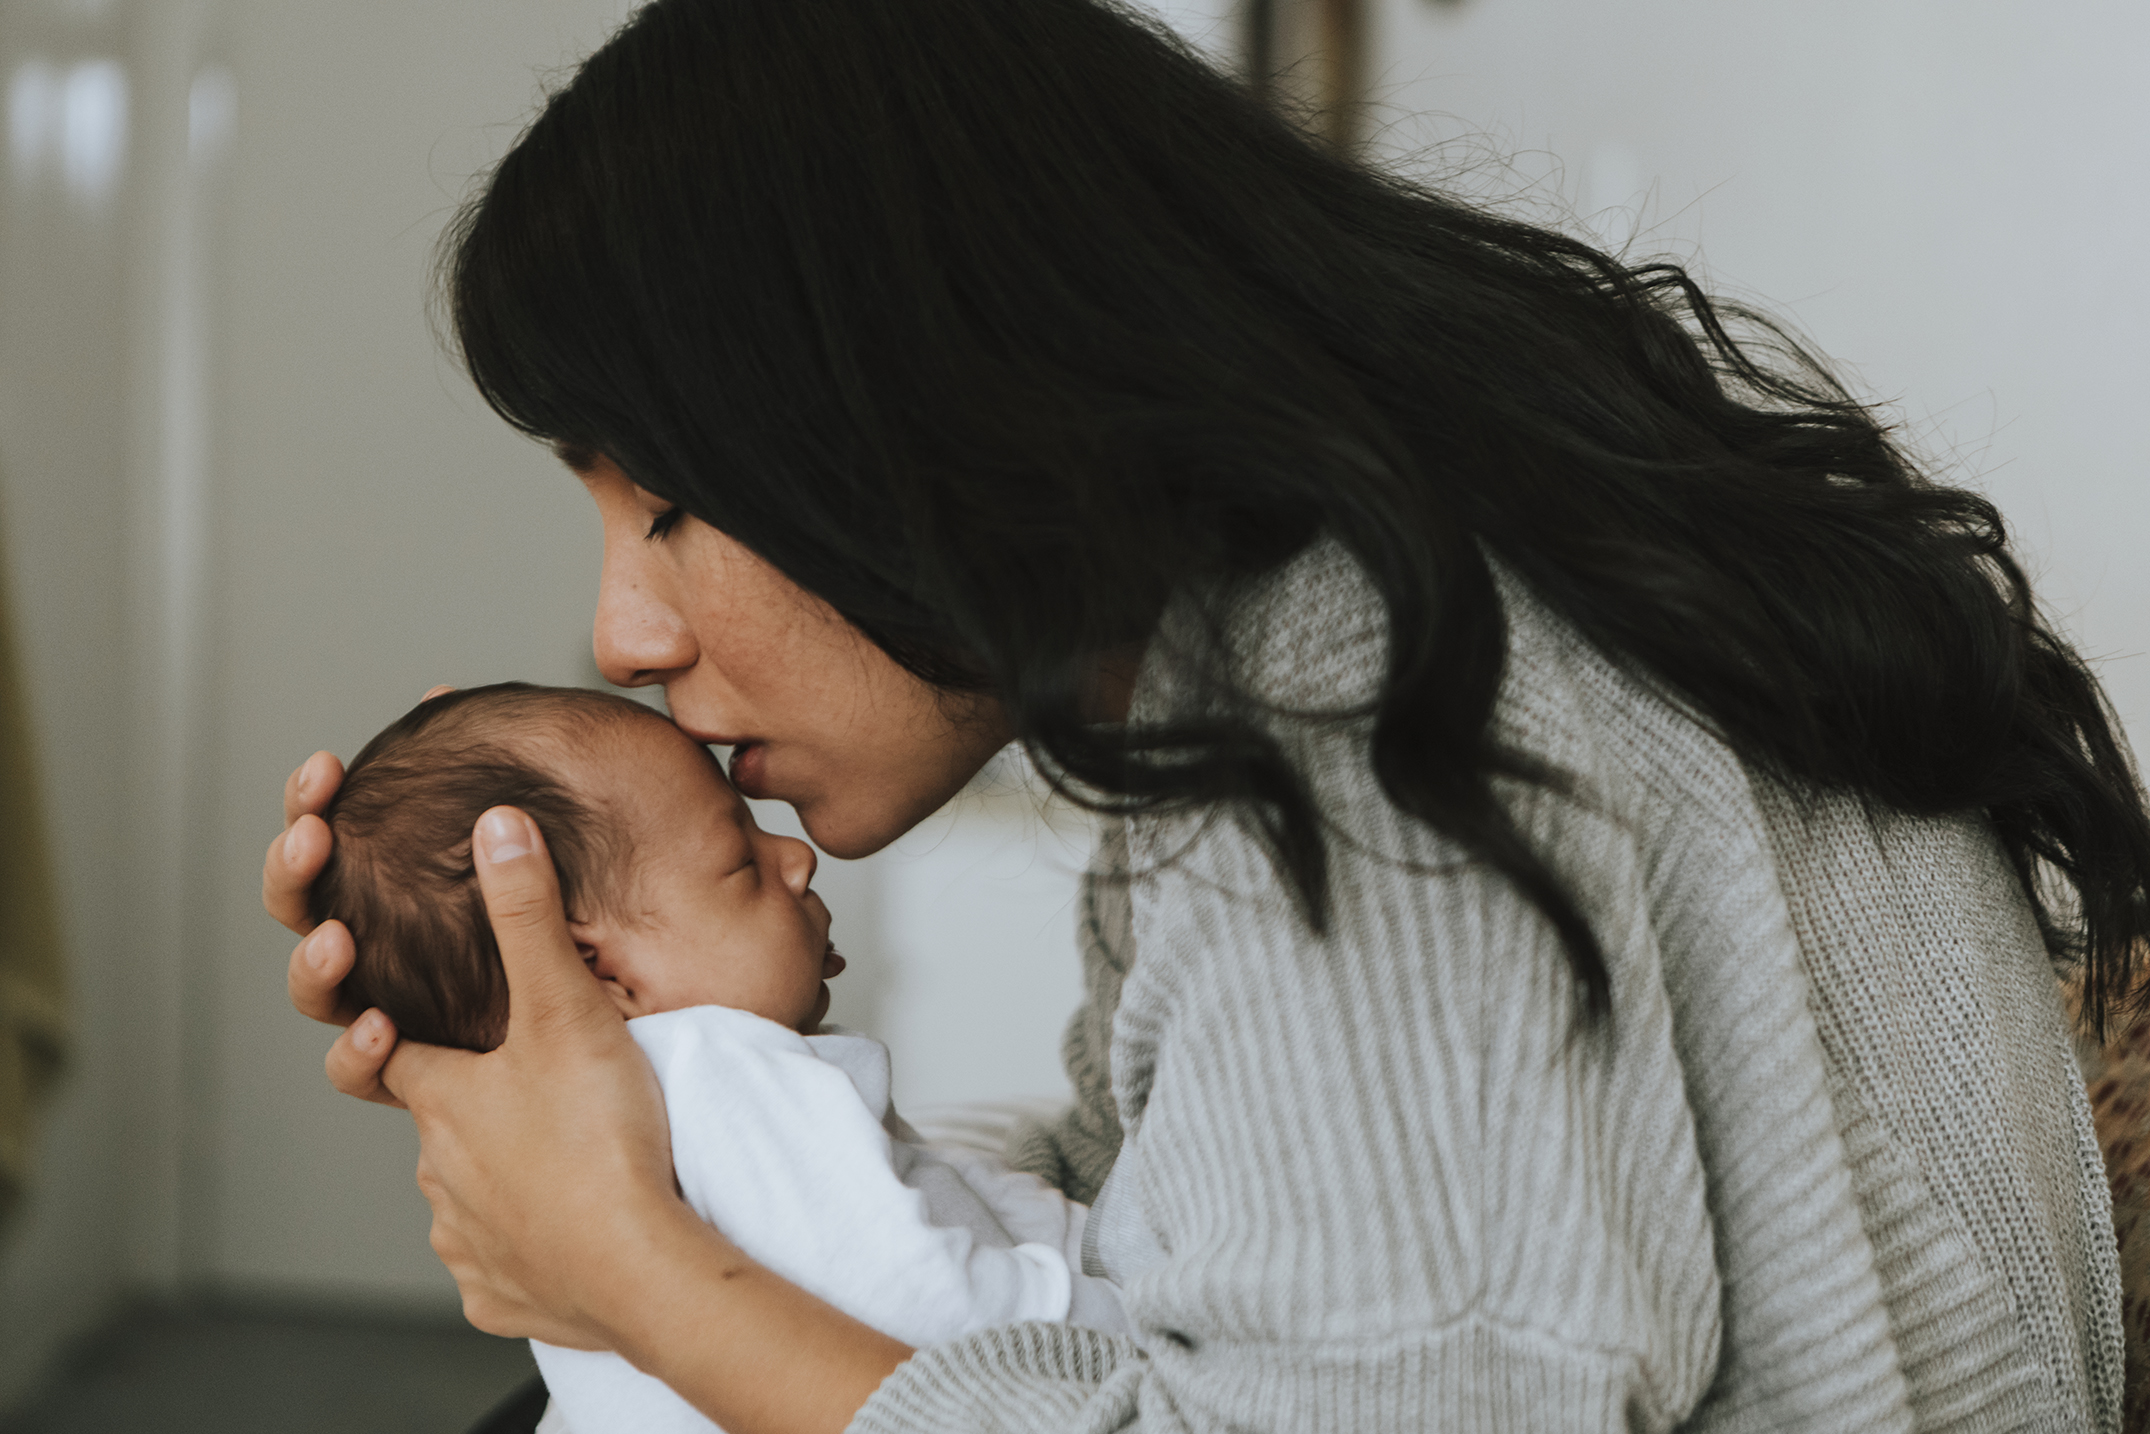 10 Things You Would Experience During Postpartum Period - Post